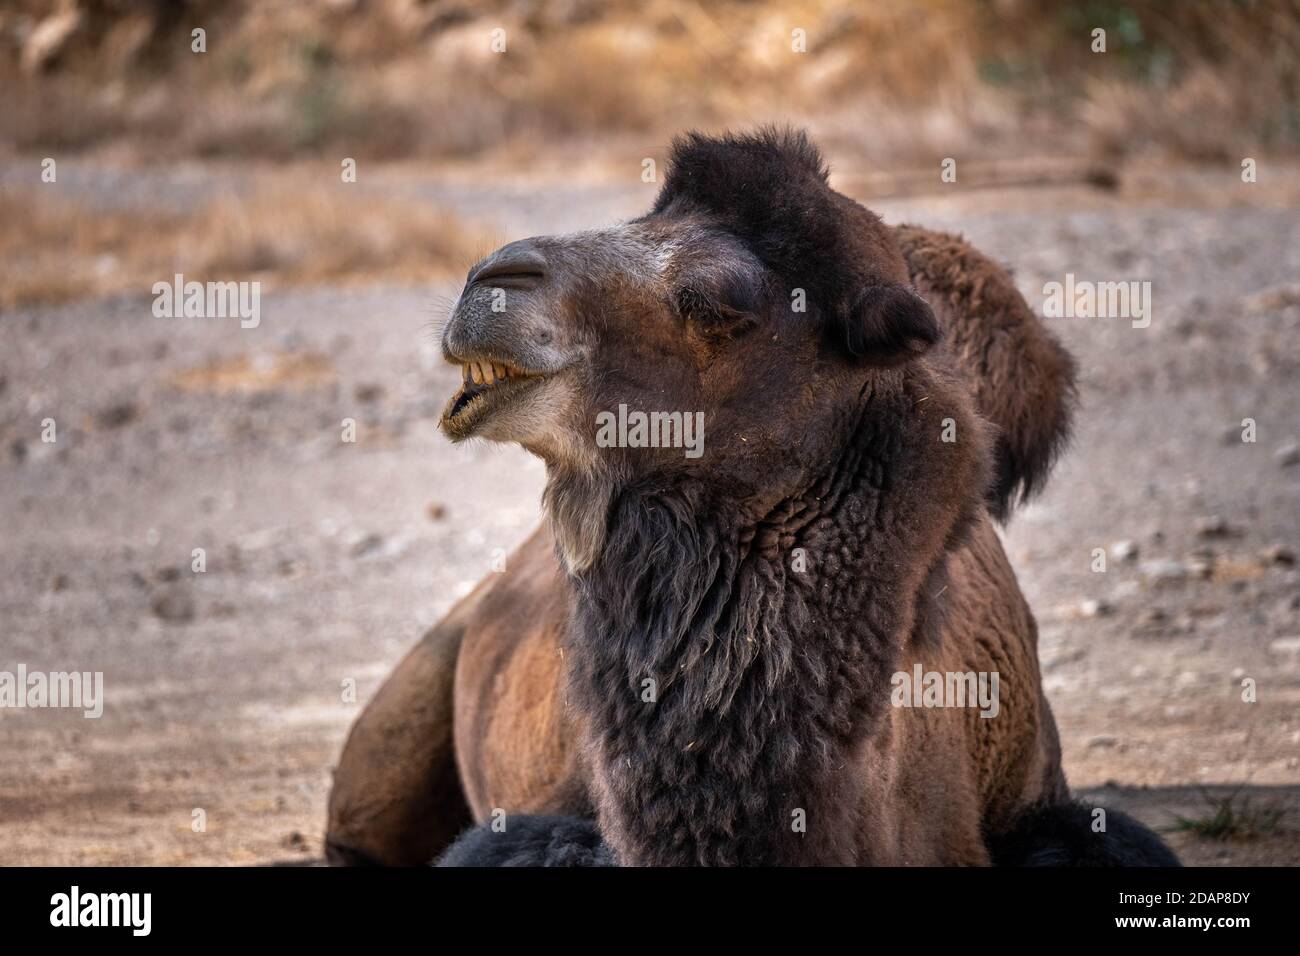 Portrait of a camel with a funny face. Bactrian camel, held captive in a zoo. Brown fur. Attica Zoological Park. Stock Photo